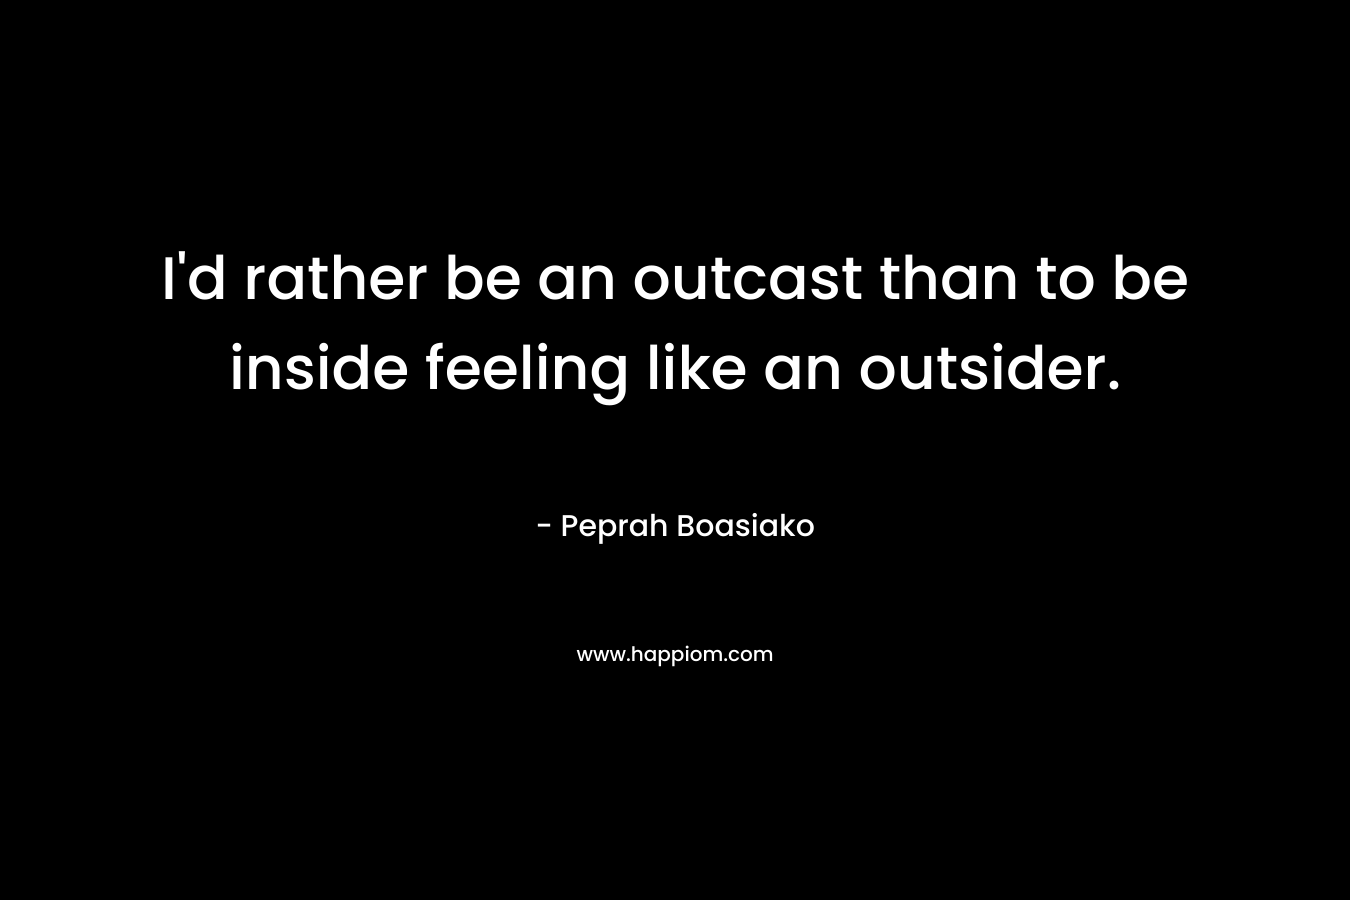 I'd rather be an outcast than to be inside feeling like an outsider.